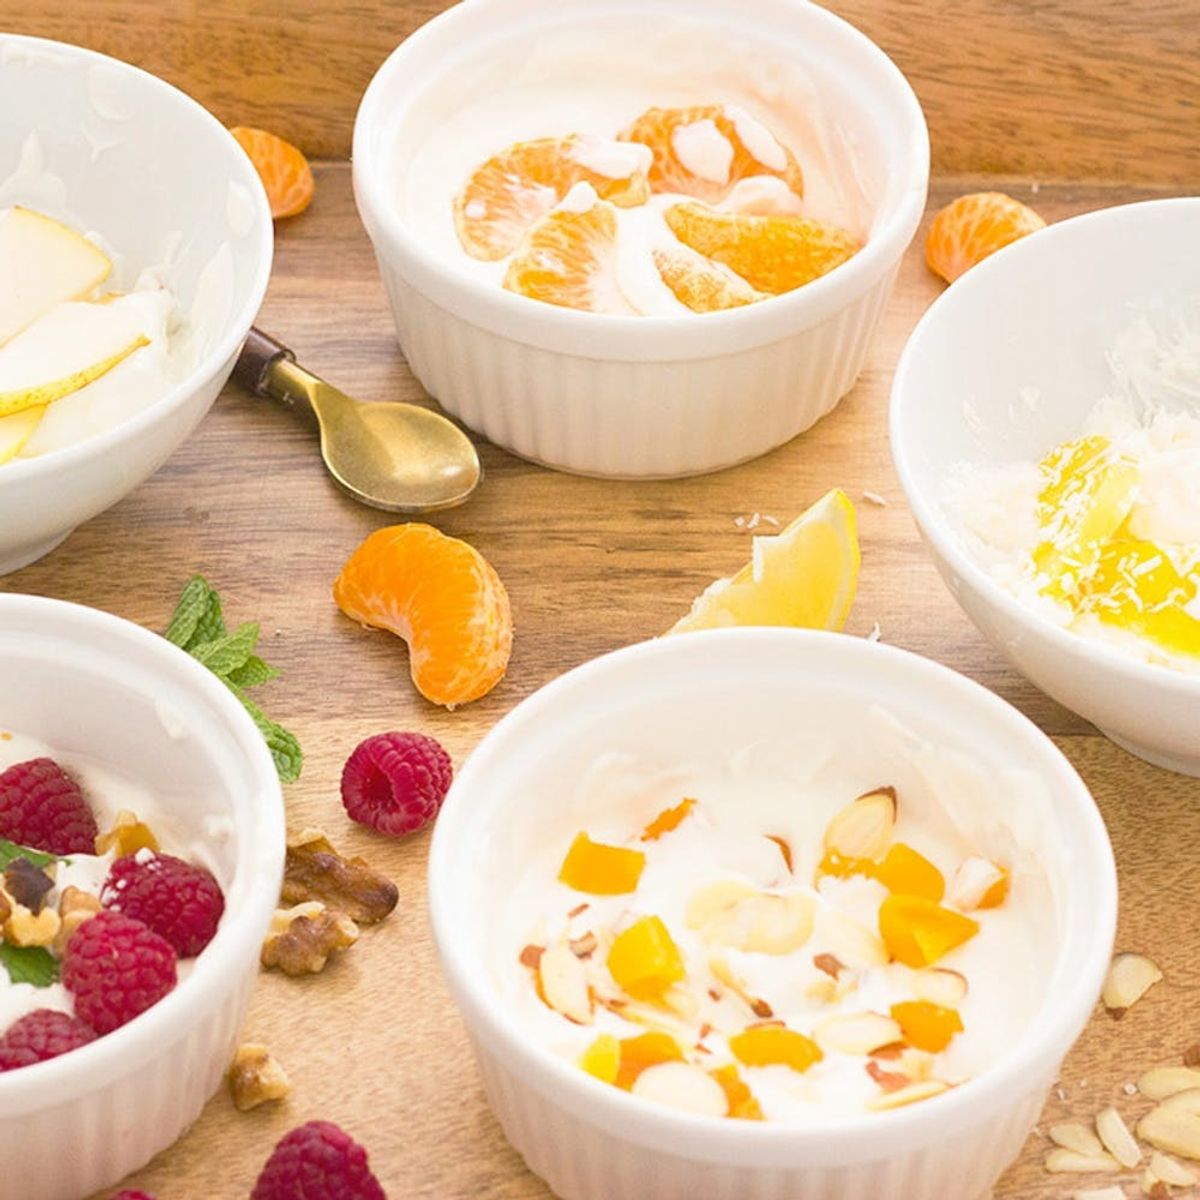 5 Healthy Yogurt Toppings to Spice Up Your Breakfast